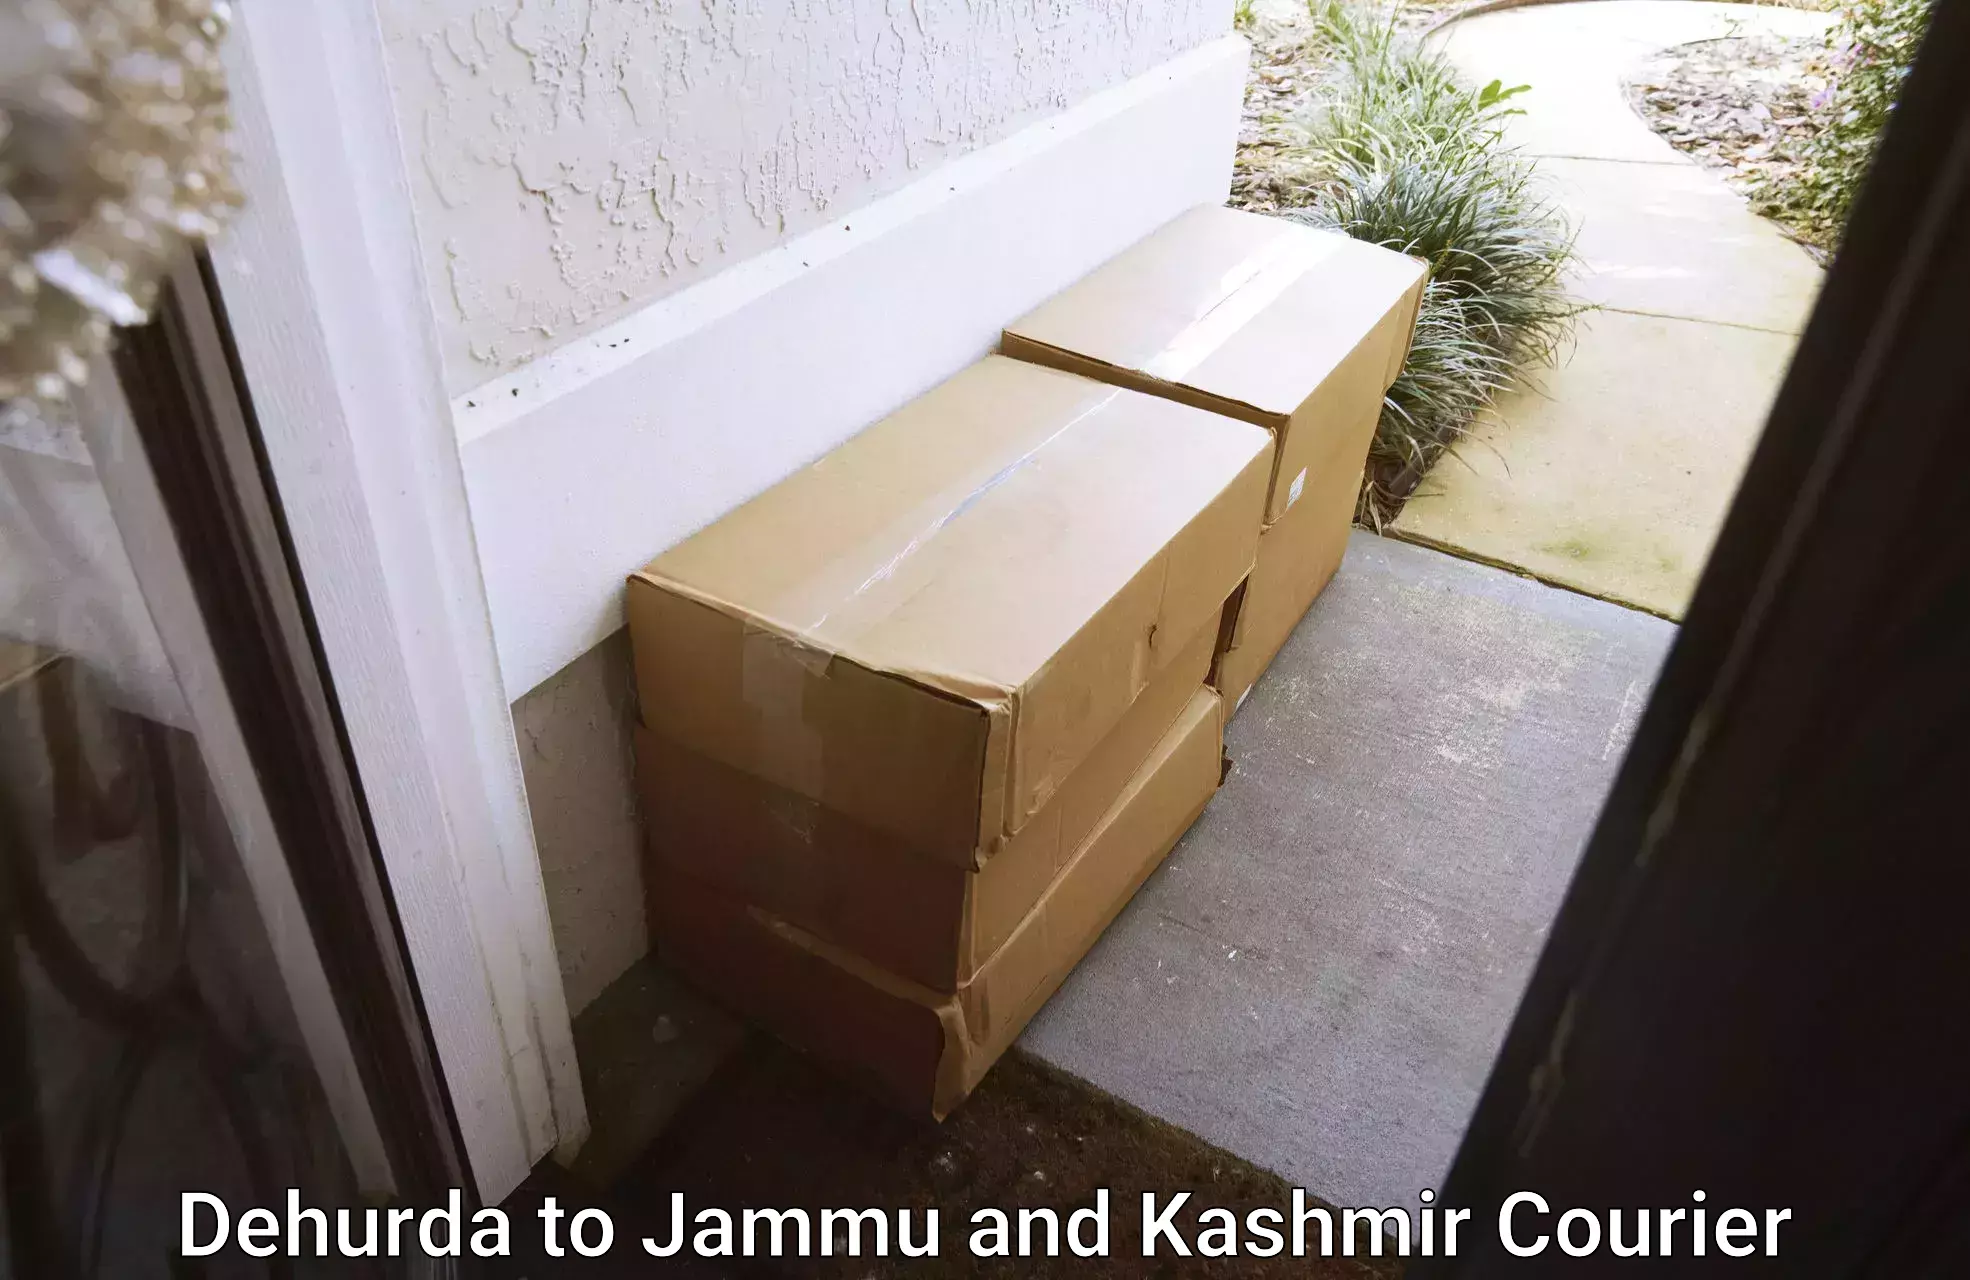 State-of-the-art courier technology in Dehurda to Jammu